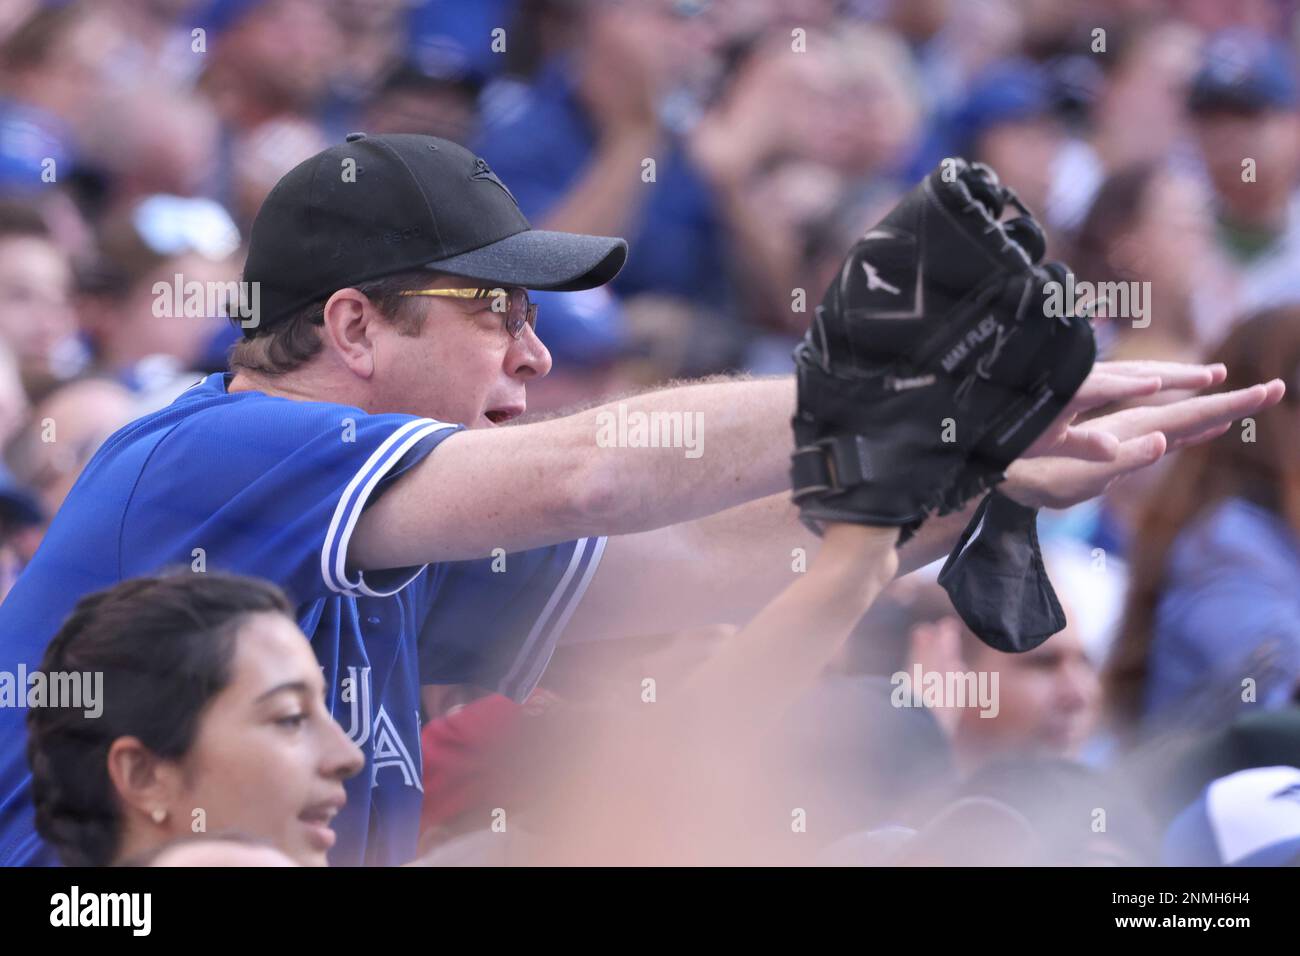 Toronto, Canada. 16th May, 2022. Toronto Blue Jay catcher Danny Jansen (9)  at bat during an MLB game between Seattle Mariners and Toronto Blue Jays at  the Rogers Centre in Toronto, Canada